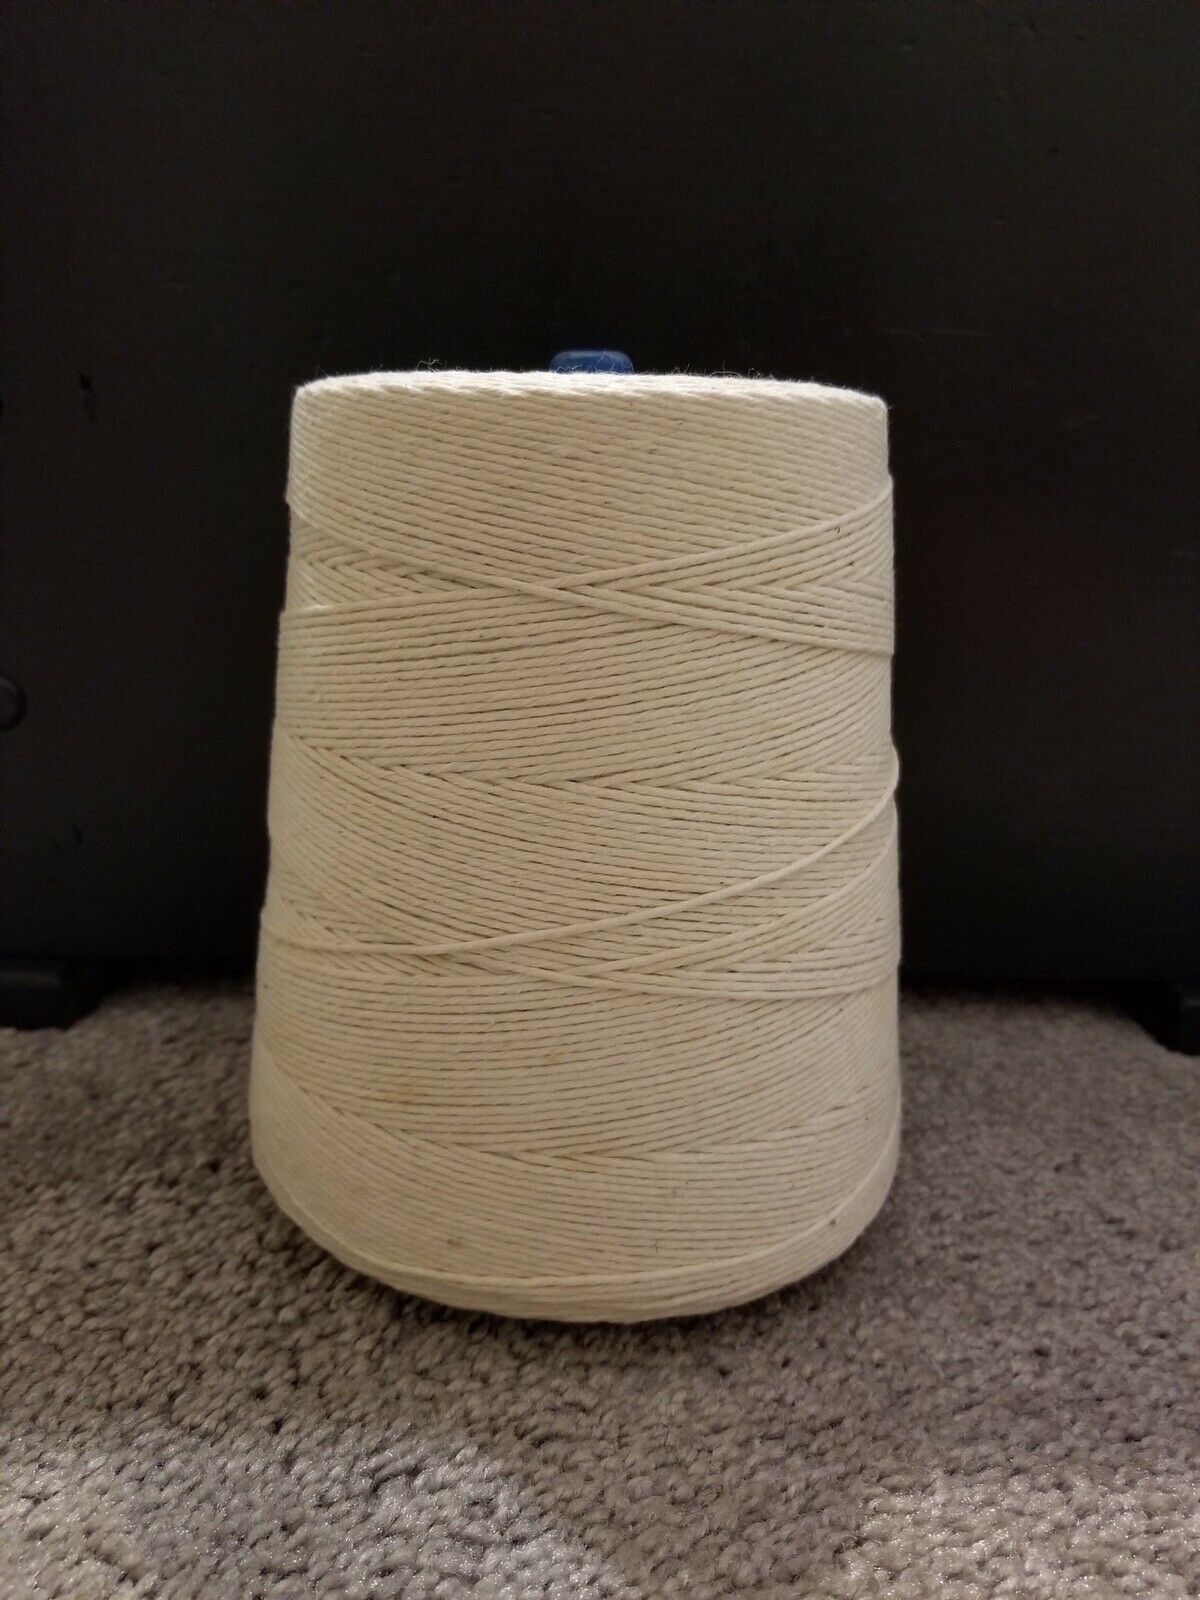 8 Ply White Cotton Twine, Cone Shaped Spool, 20 Lb Tension Strength-vintage New